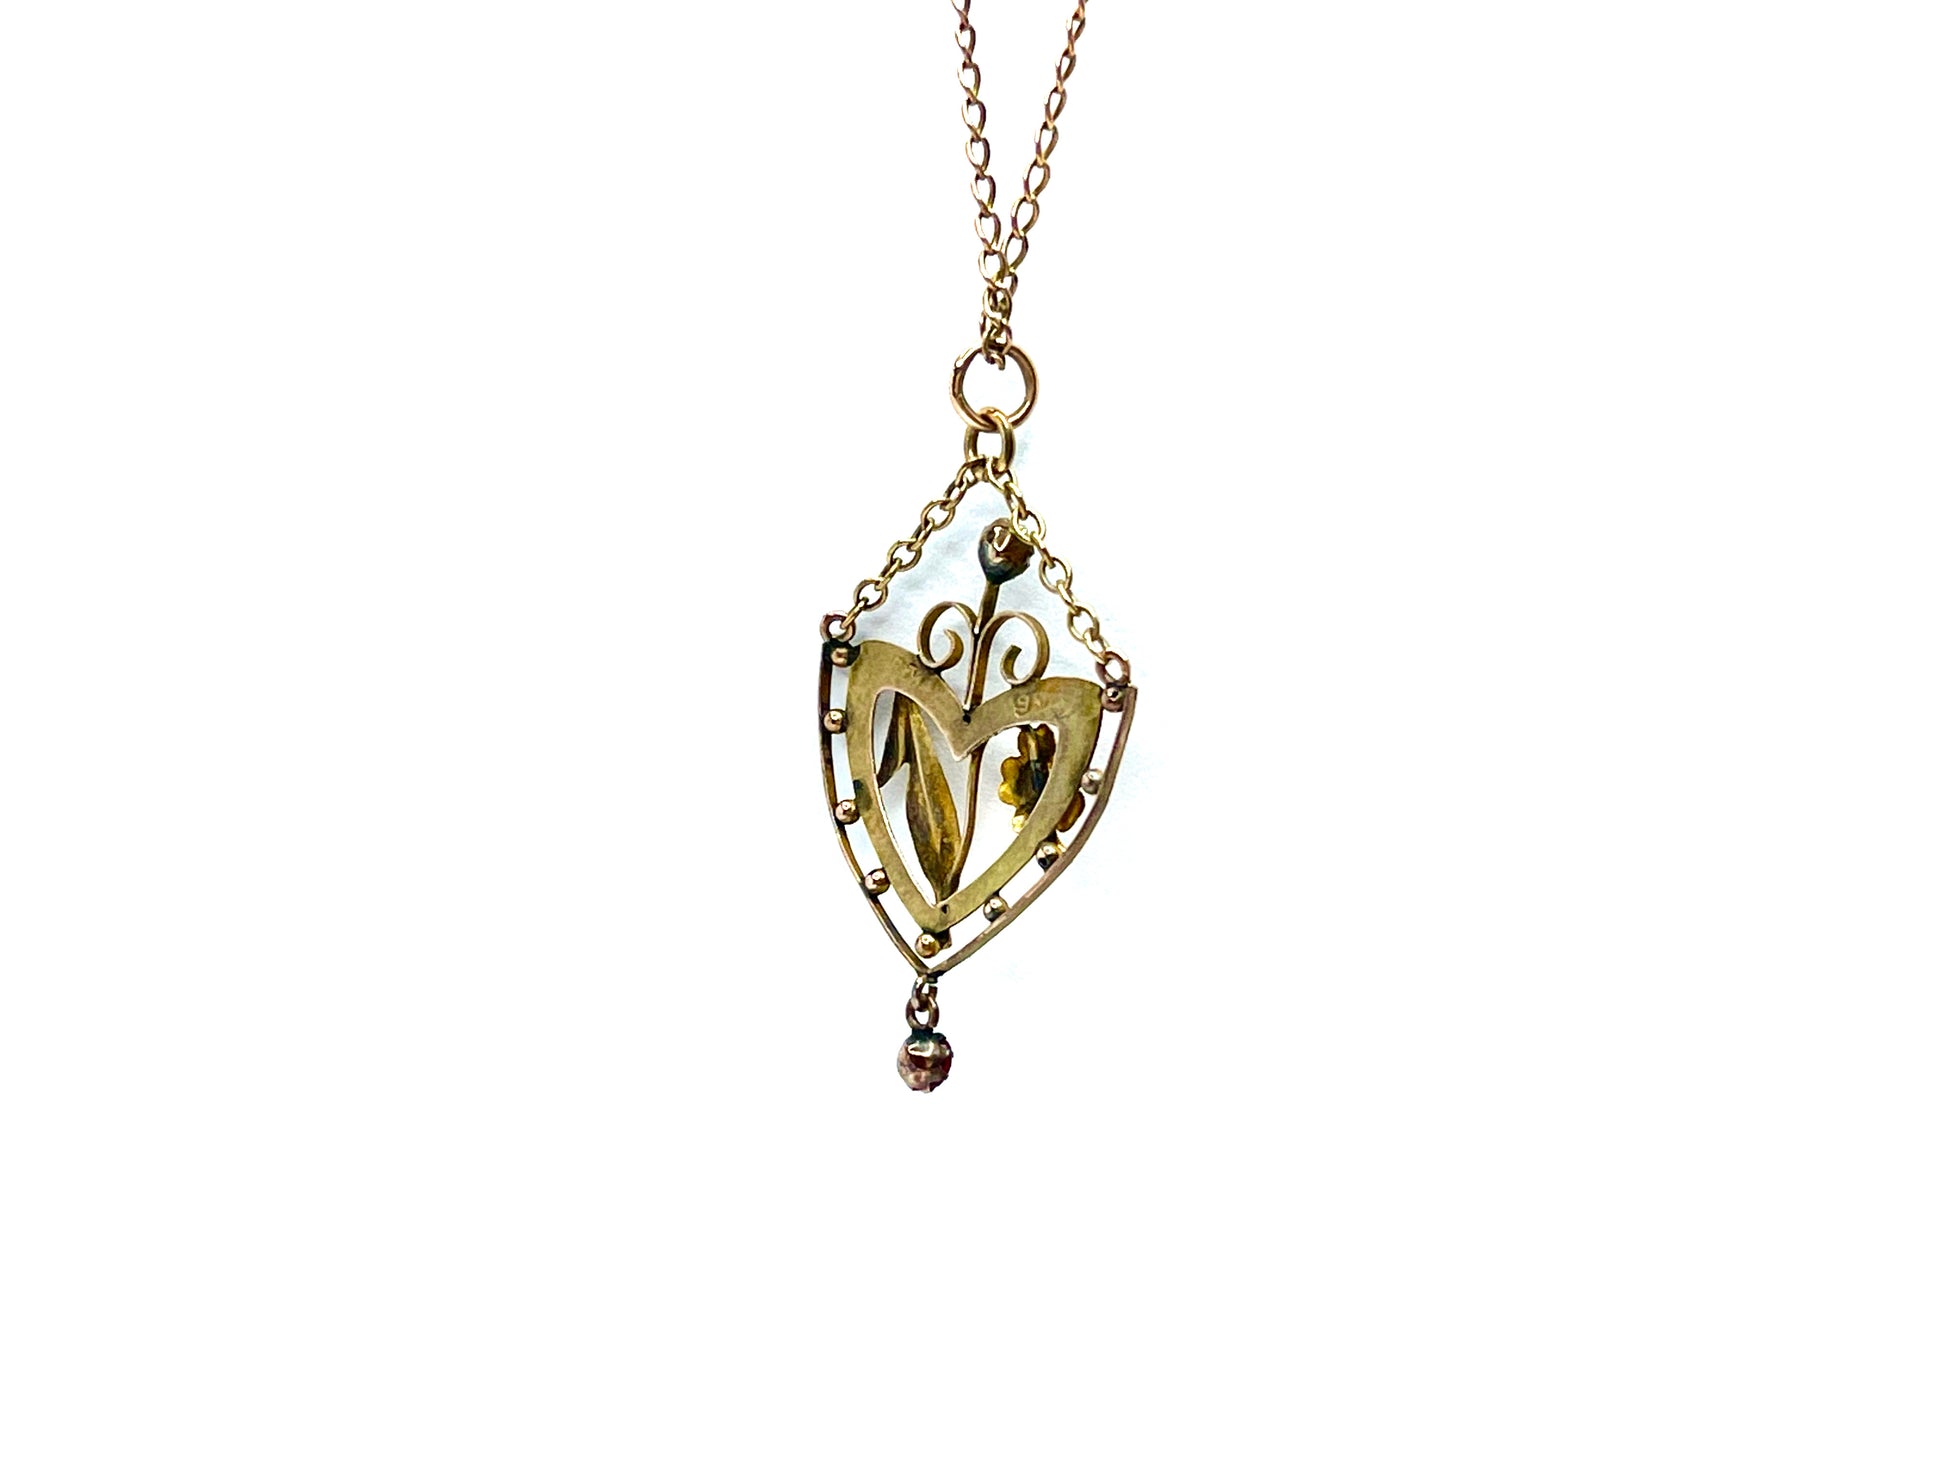 edwardian-9ct-gold-necklace-with-pendant